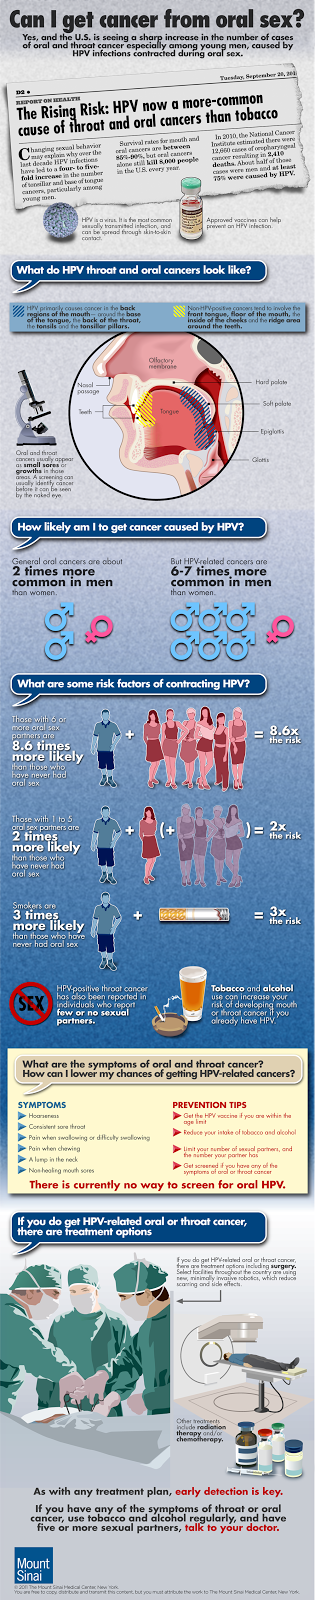 Infographic Hpv From Oral Sex Causes Throat Cancer Fauquier Ent Blog 